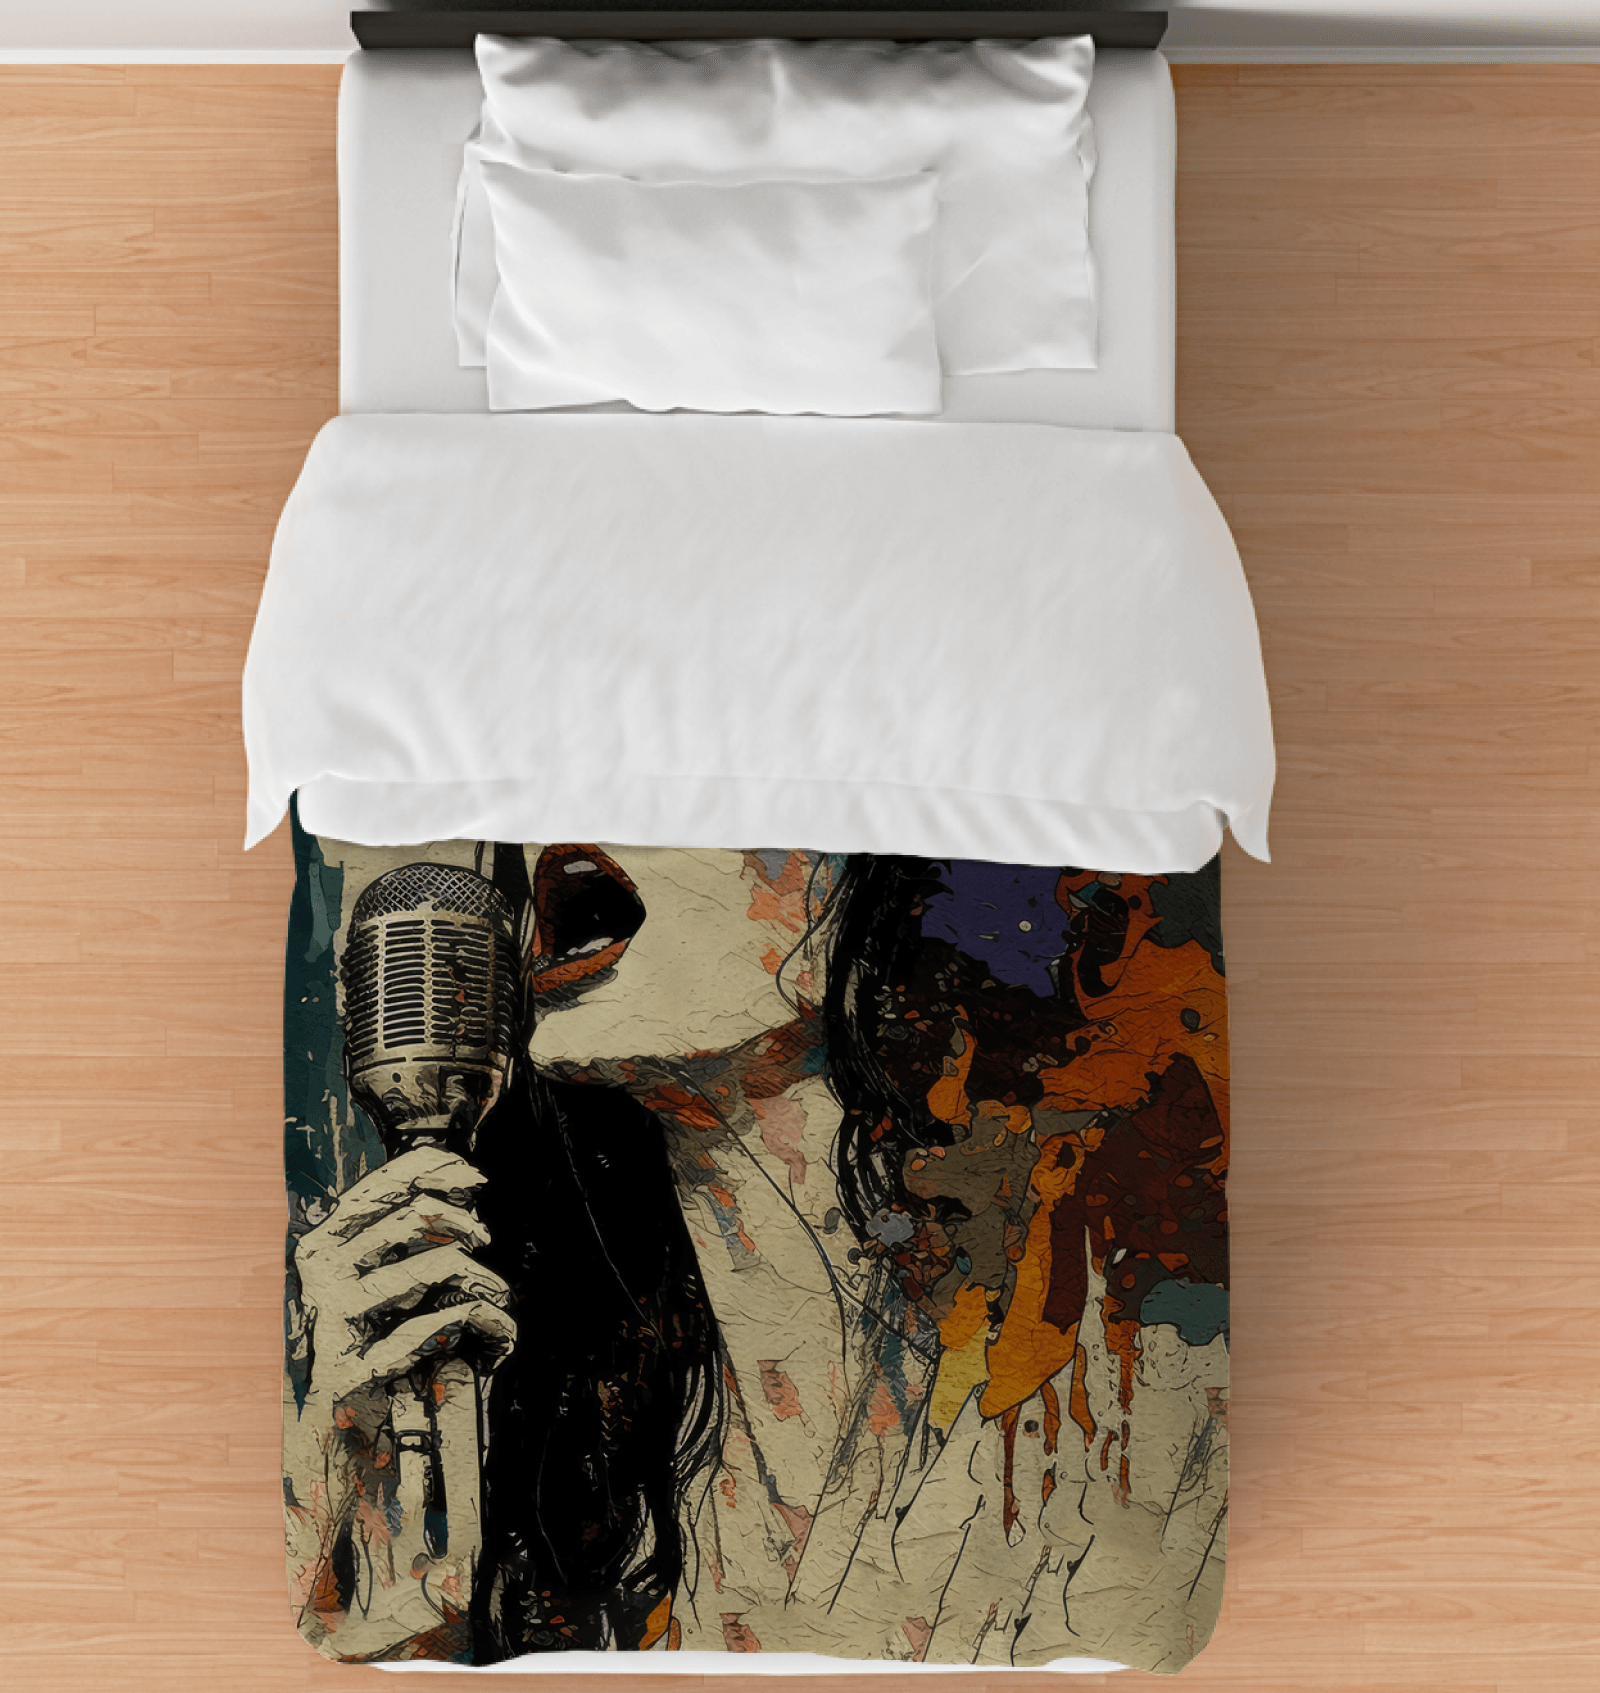 Contemporary NS 990 Duvet Cover for a chic bedroom update